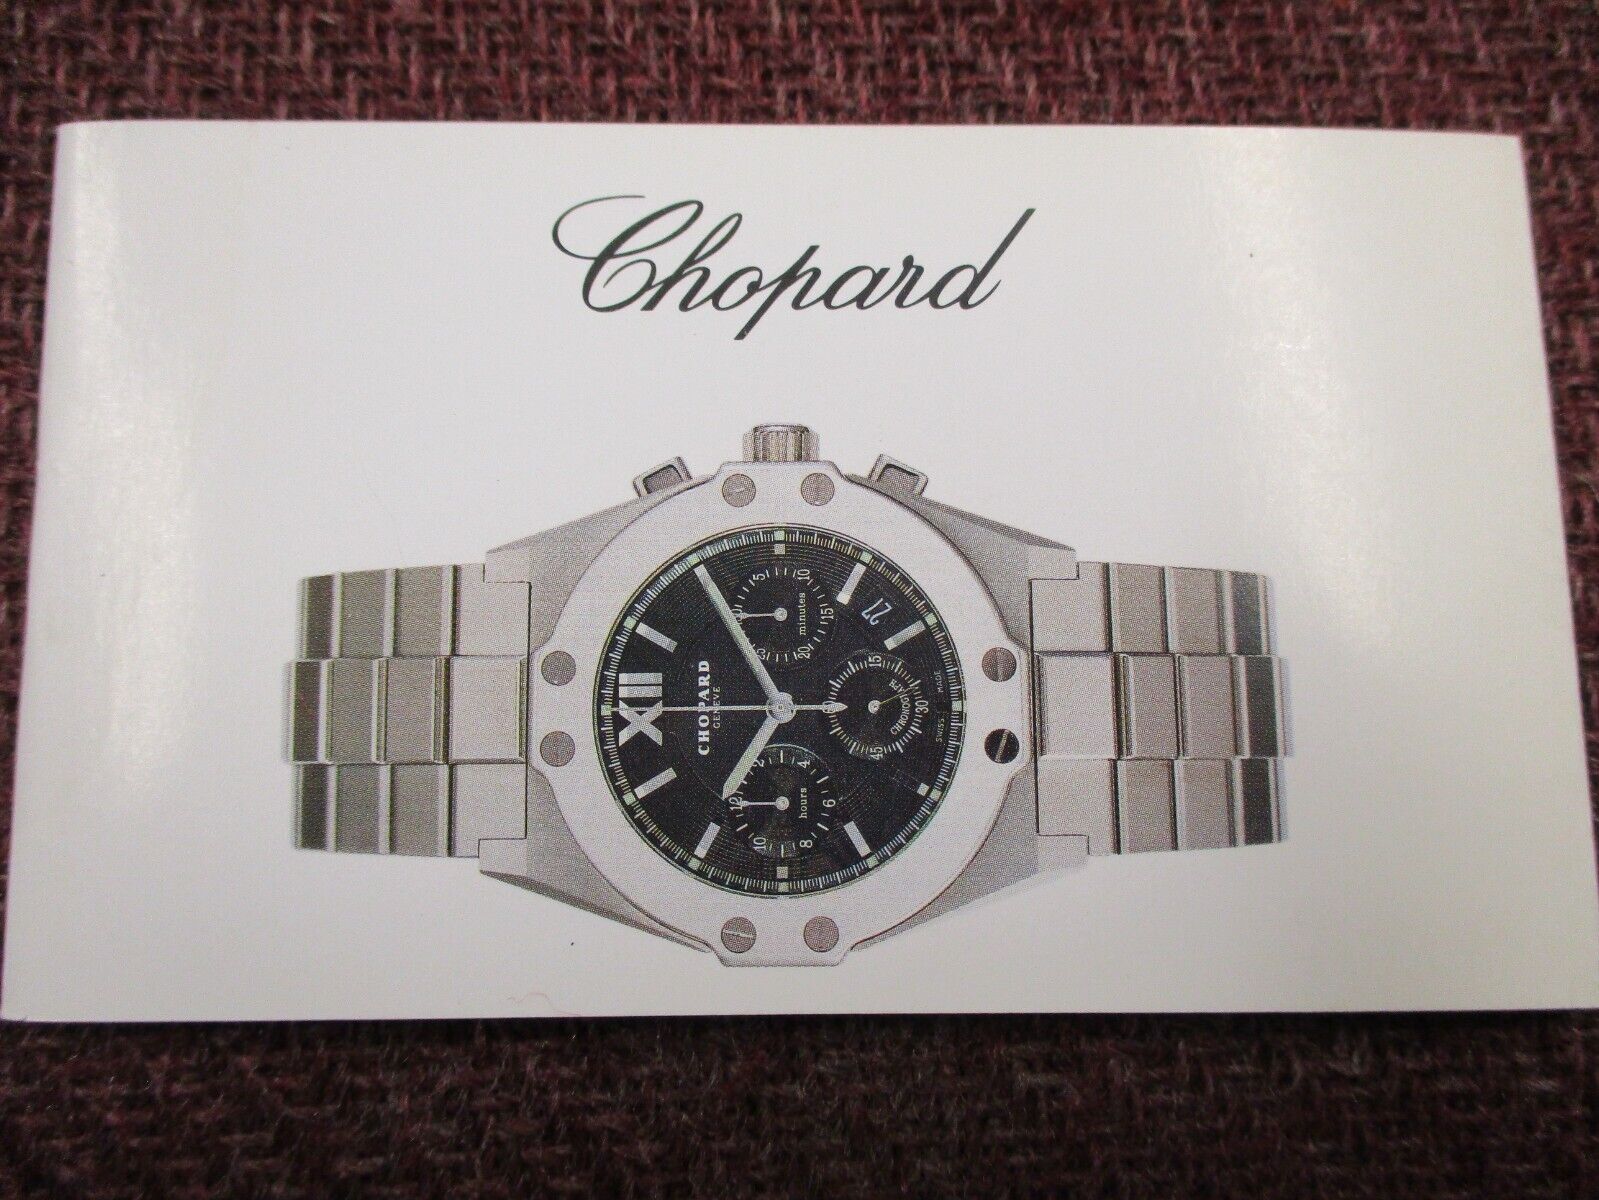 CHOPARD St. Moritz Watch and Chronograph Models Information & Instructions Book